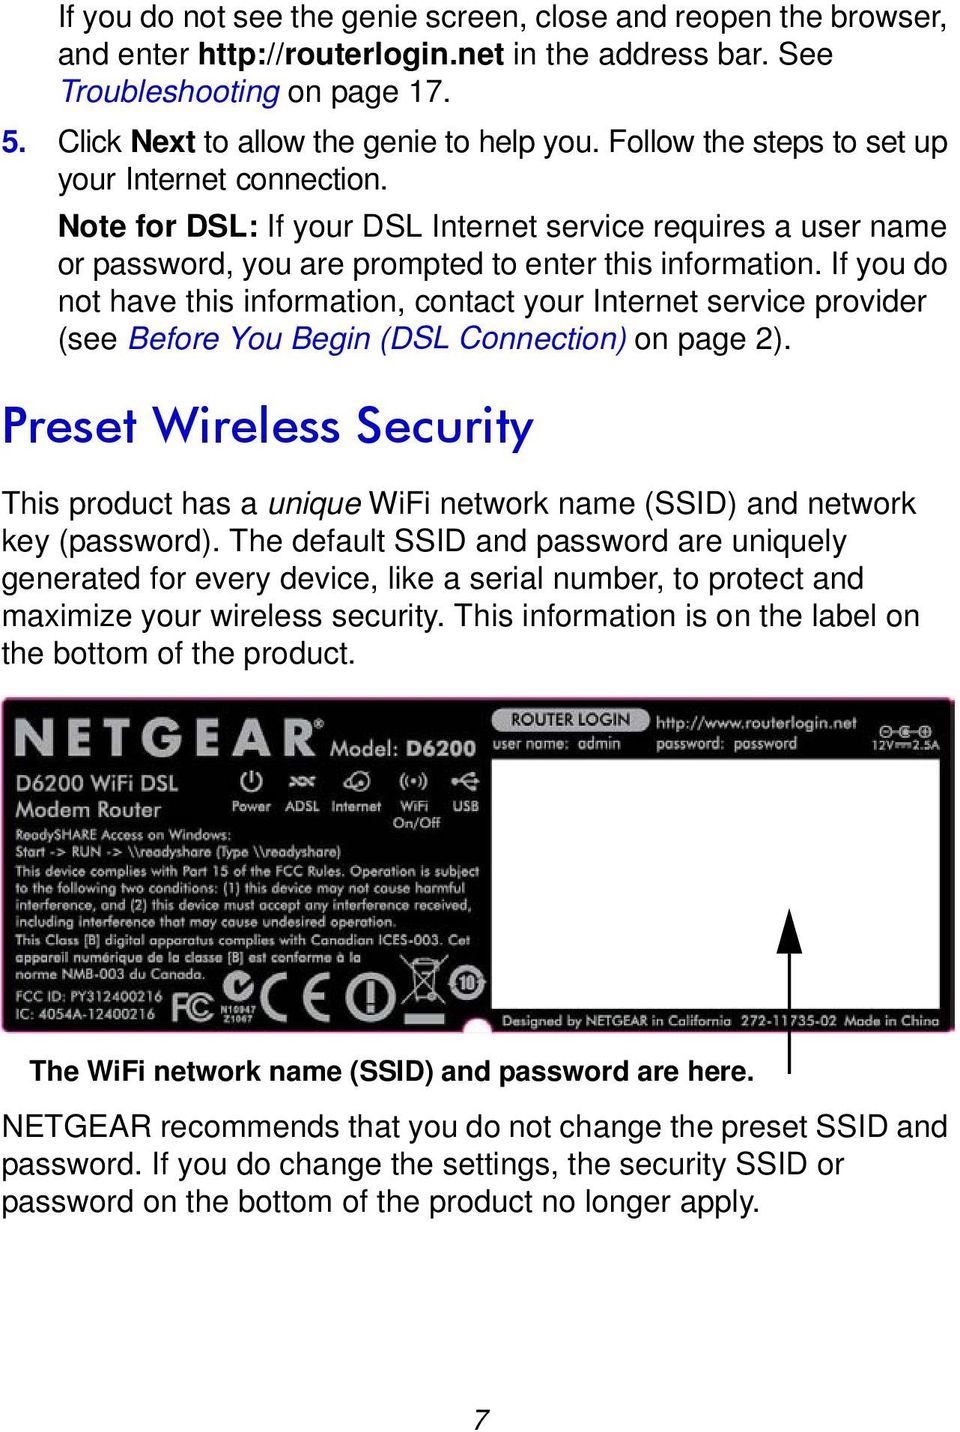 If you do not have this information, contact your Internet service provider (see Before You Begin (DSL Connection) on page 2).